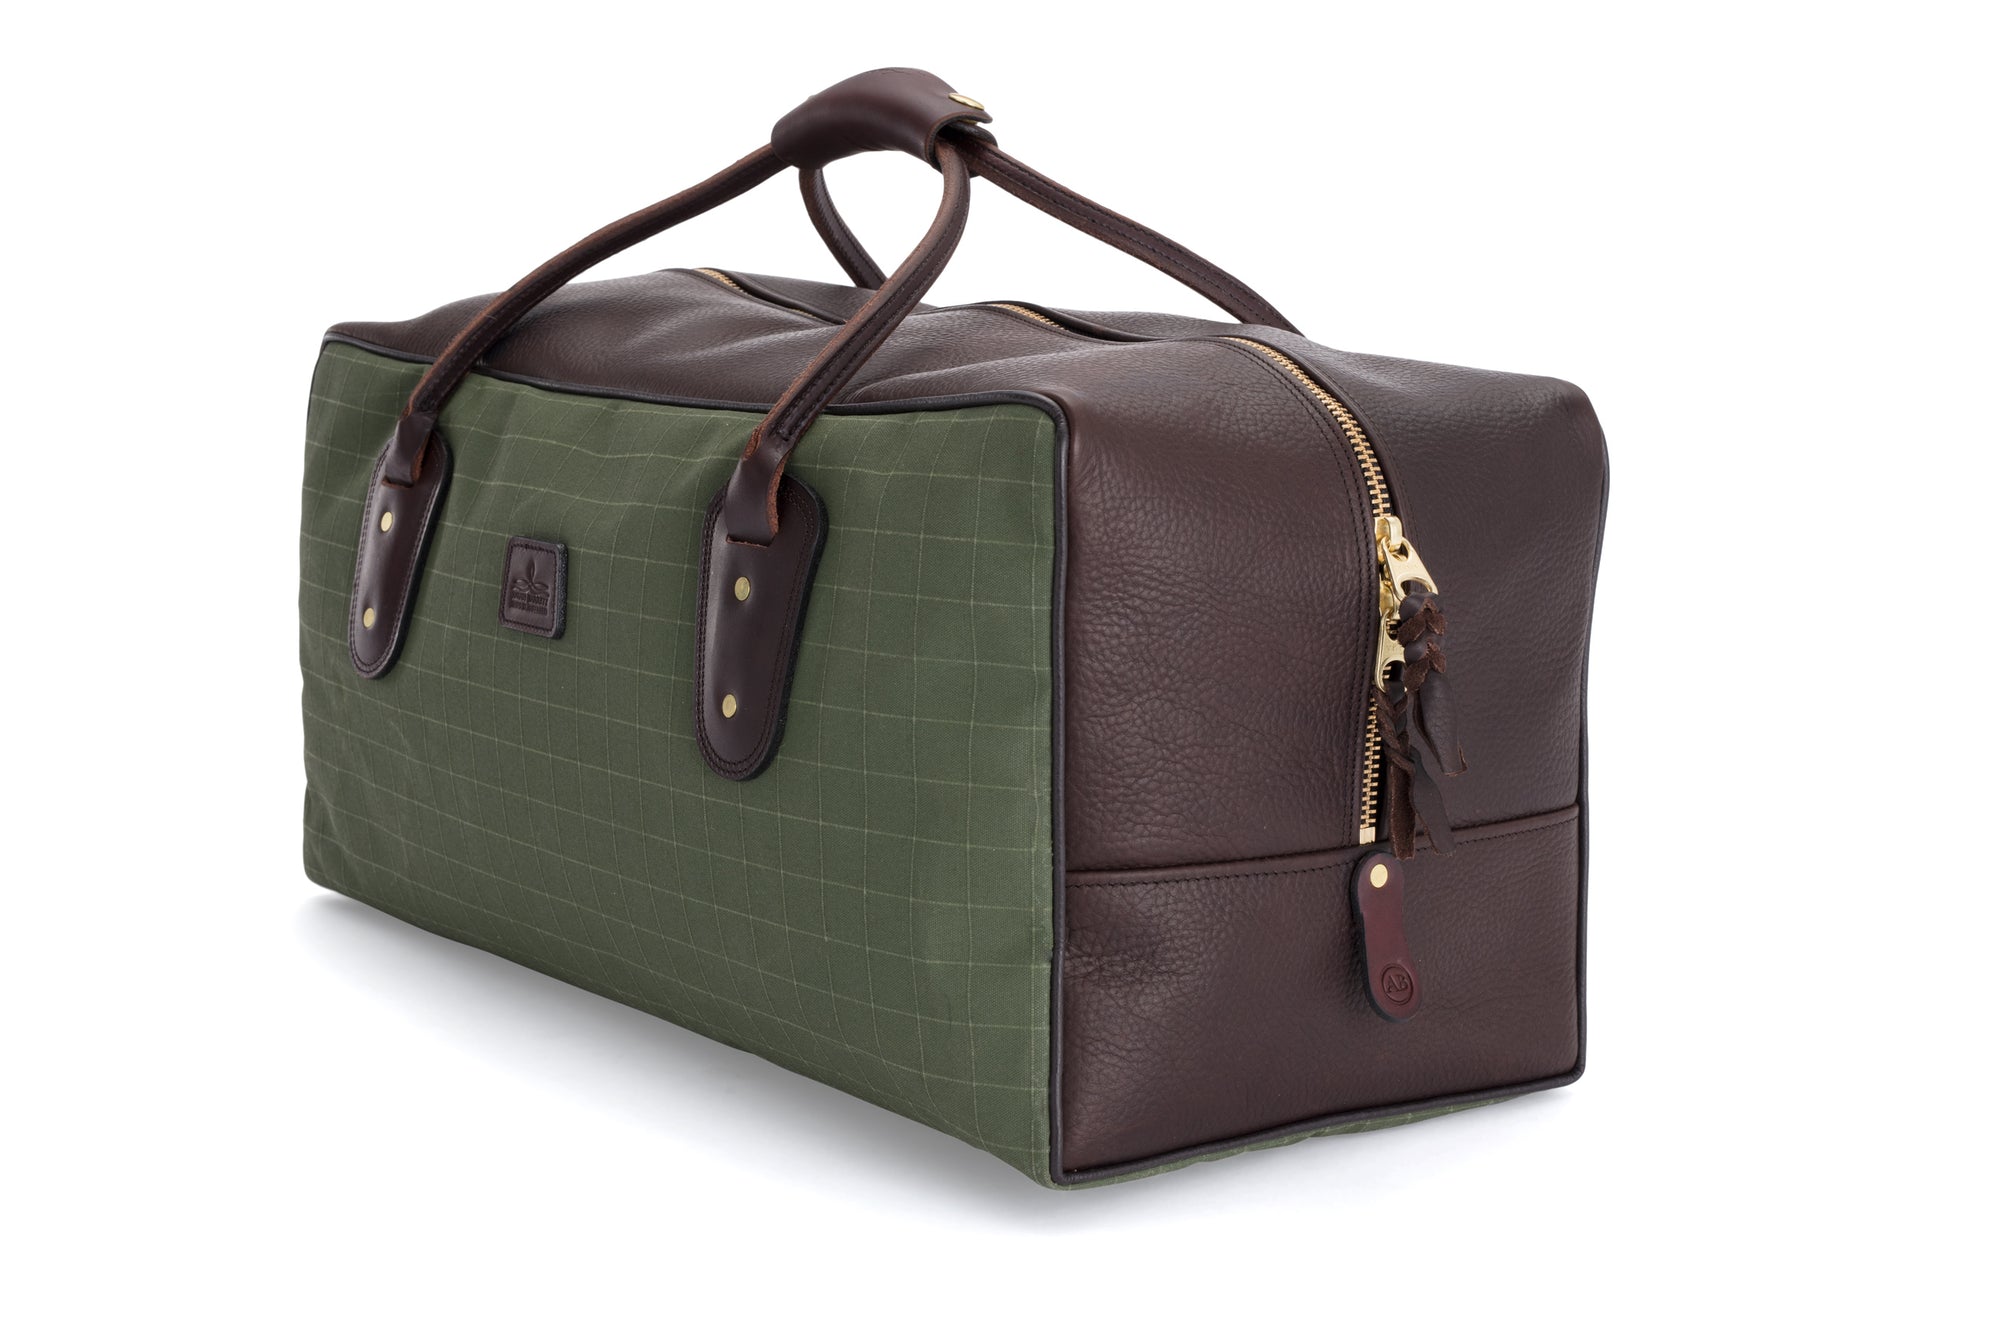 Weekender Travel Bag - Green Canvas with Chocolate Leather | Angus Barrett Saddlery